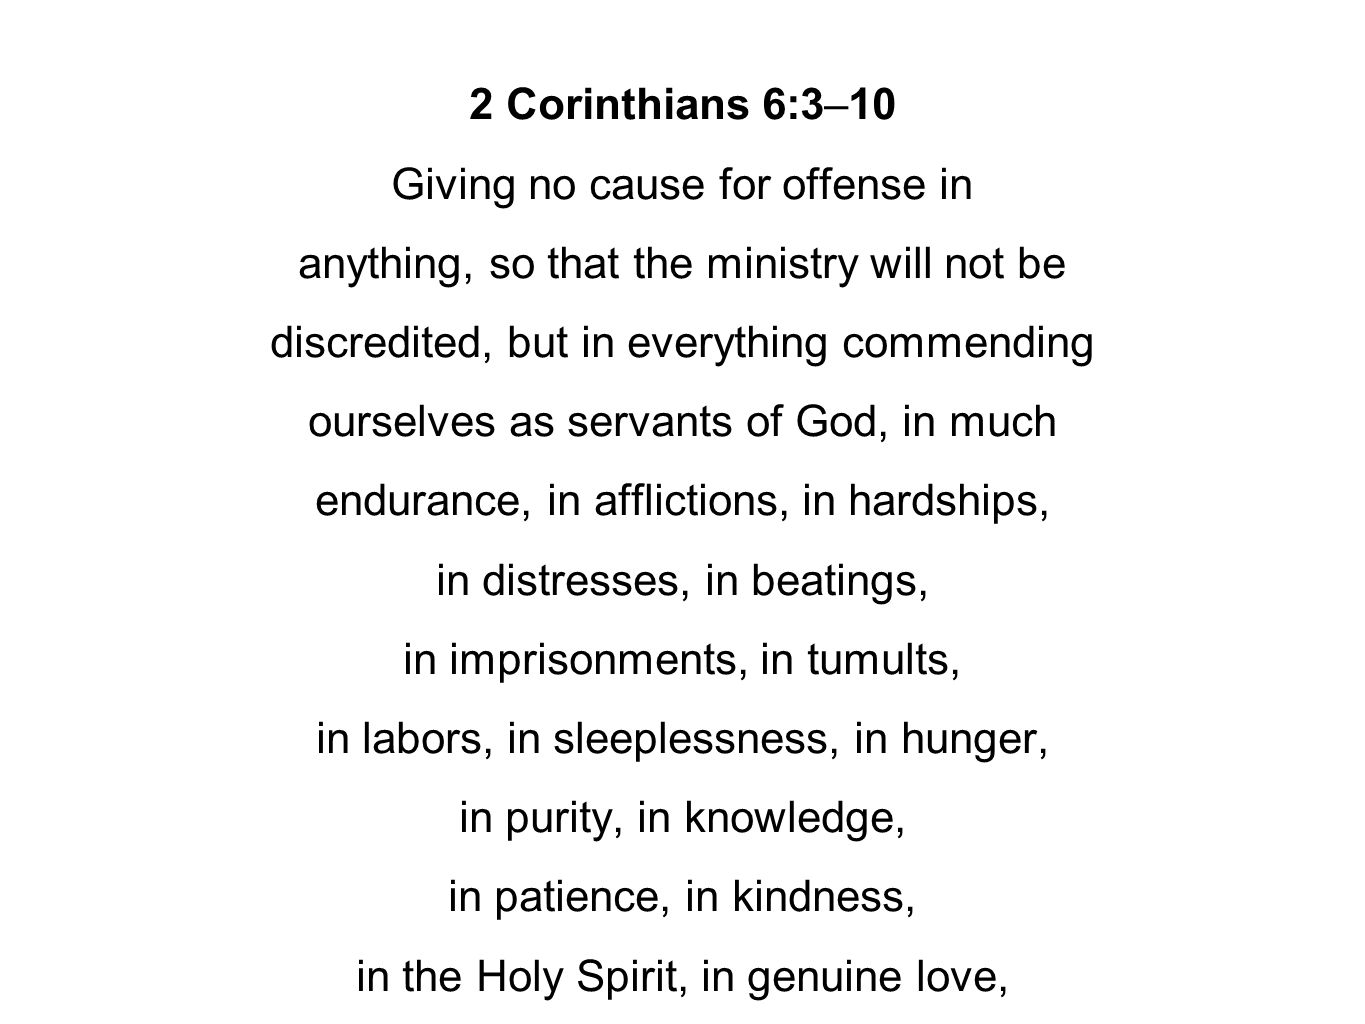 2 Corinthians 6:3–10 Giving no cause for offense in anything, so that the ministry will not be discredited, but in everything commending ourselves as servants of God, in much endurance, in afflictions, in hardships, in distresses, in beatings, in imprisonments, in tumults, in labors, in sleeplessness, in hunger, in purity, in knowledge, in patience, in kindness, in the Holy Spirit, in genuine love,